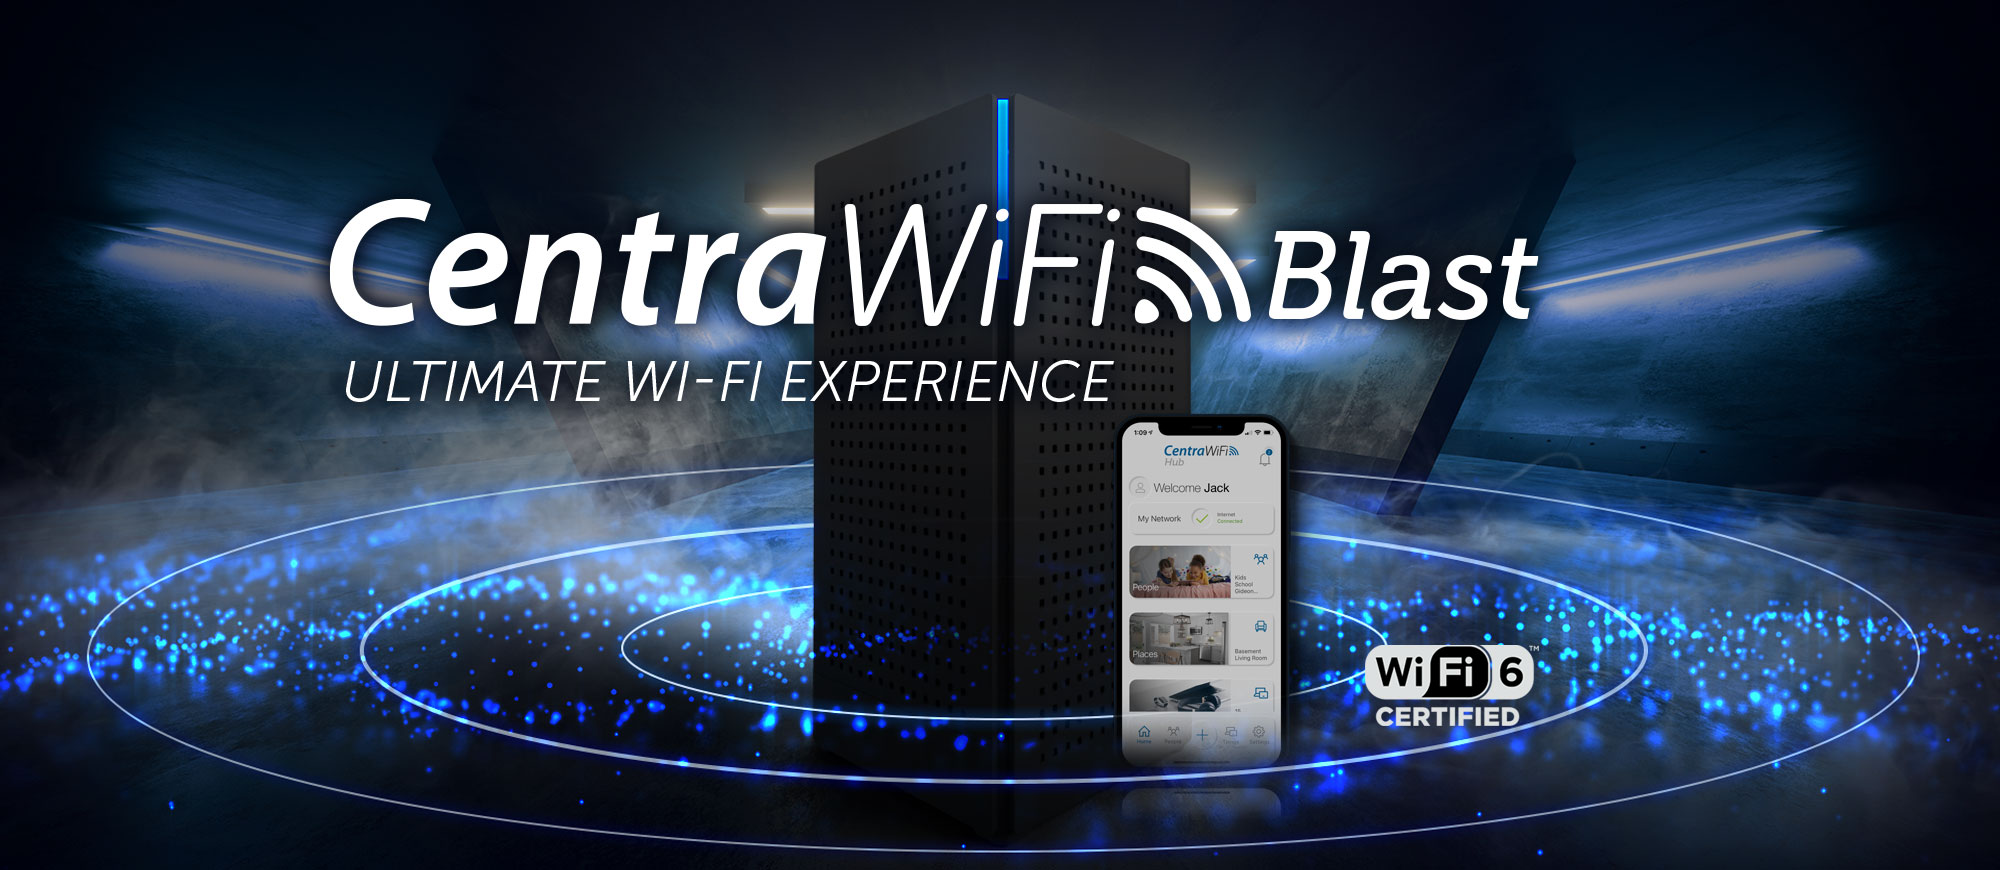 CentraWiFi Blast router with Virus and Malware protection